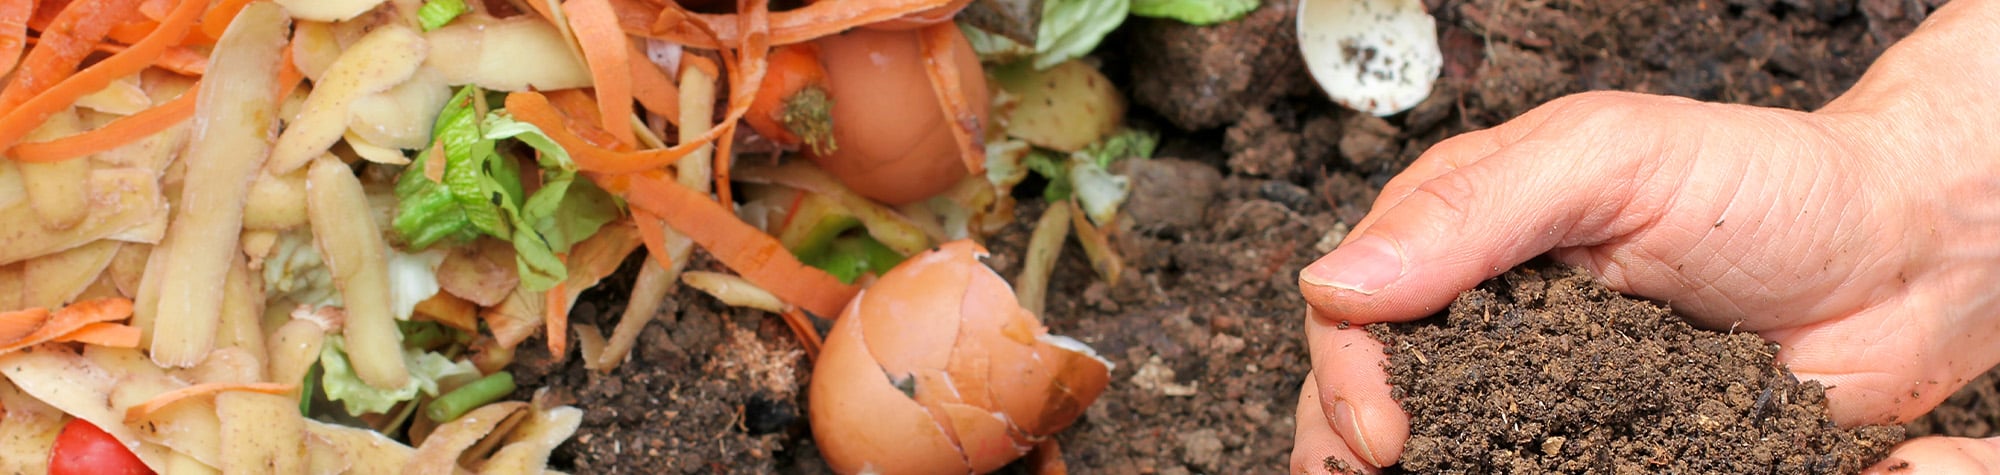 Grillio’s Guide to Food Waste and Composting